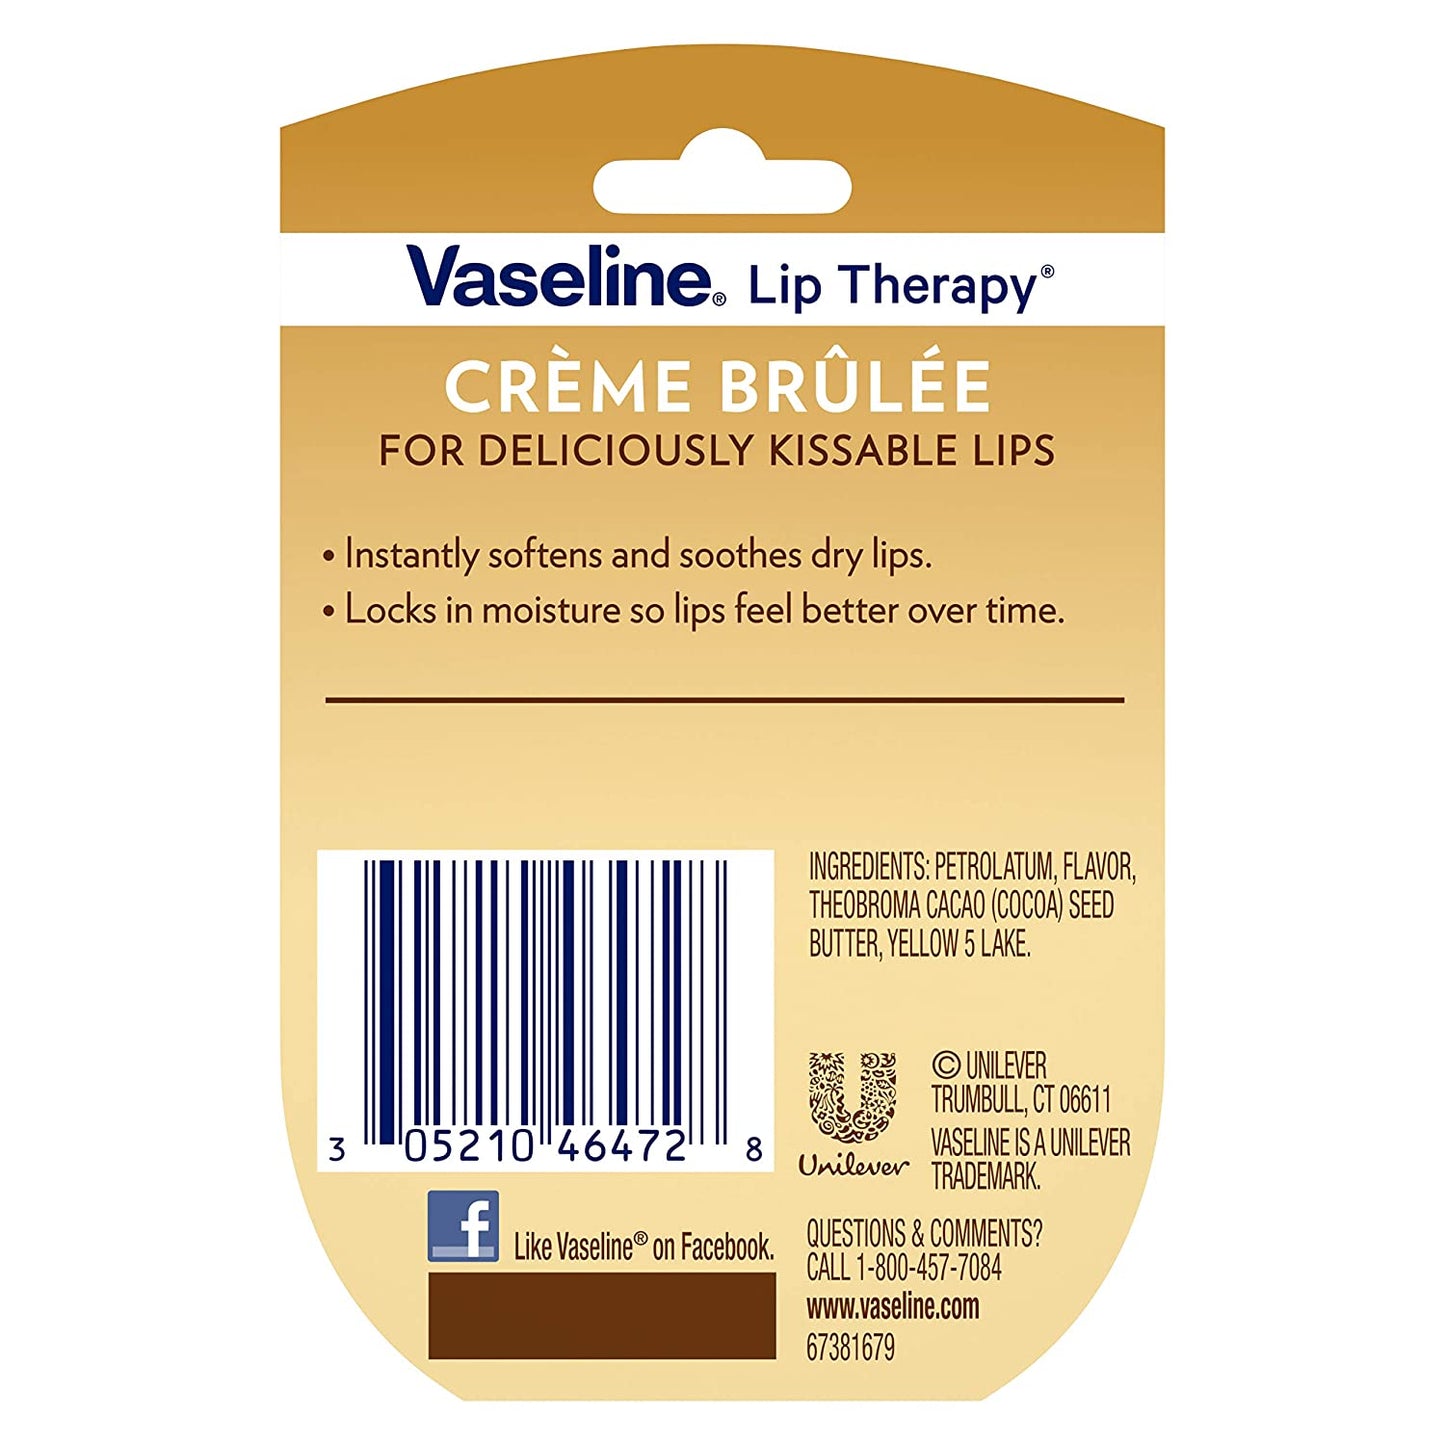 Vaseline Creme Brulee Lip Therapy Lip Balm for Deliciously Kissable Lips, 0.25 oz. / 7g